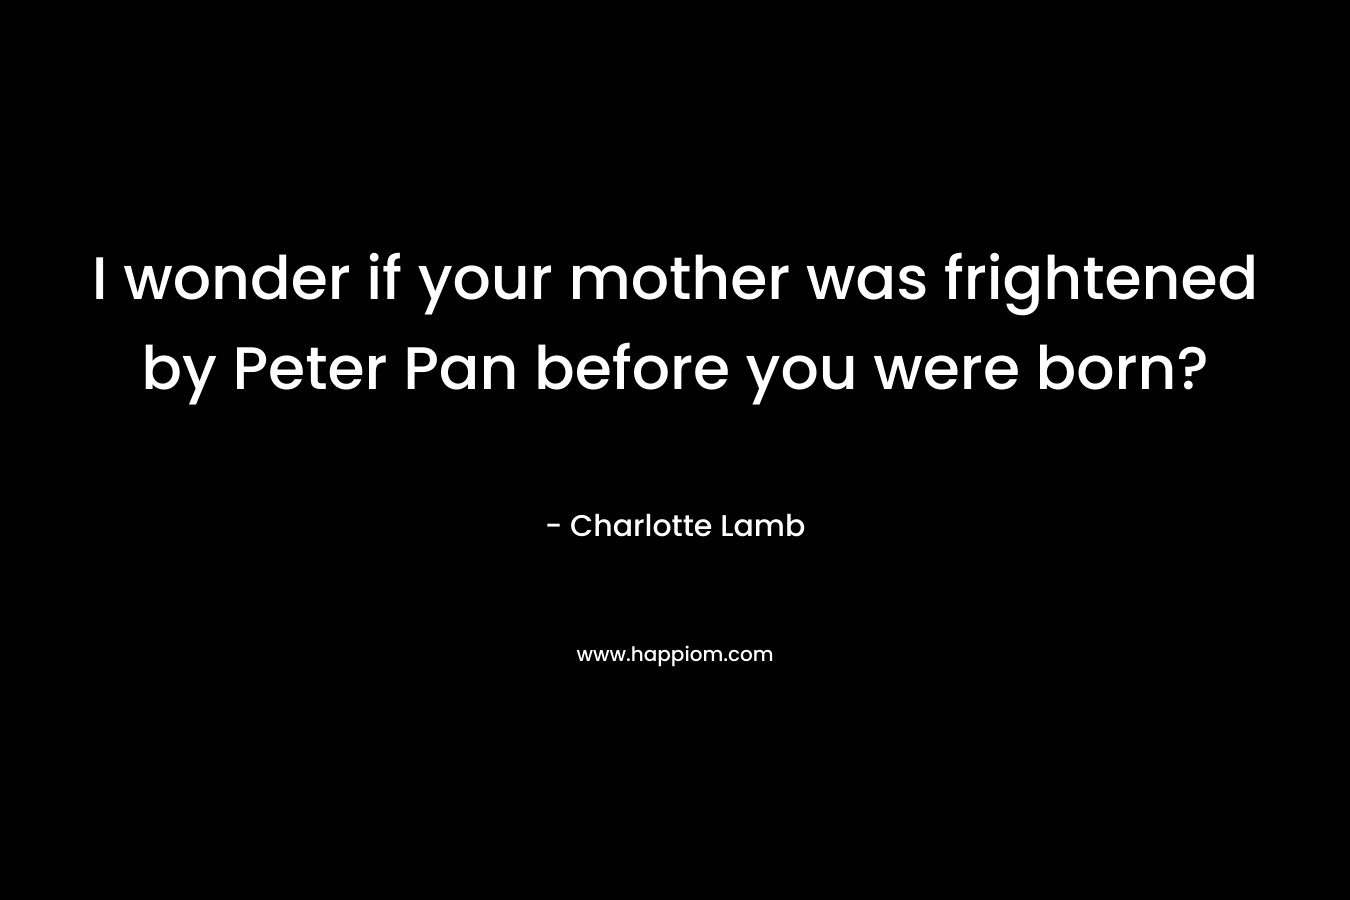 I wonder if your mother was frightened by Peter Pan before you were born? – Charlotte Lamb